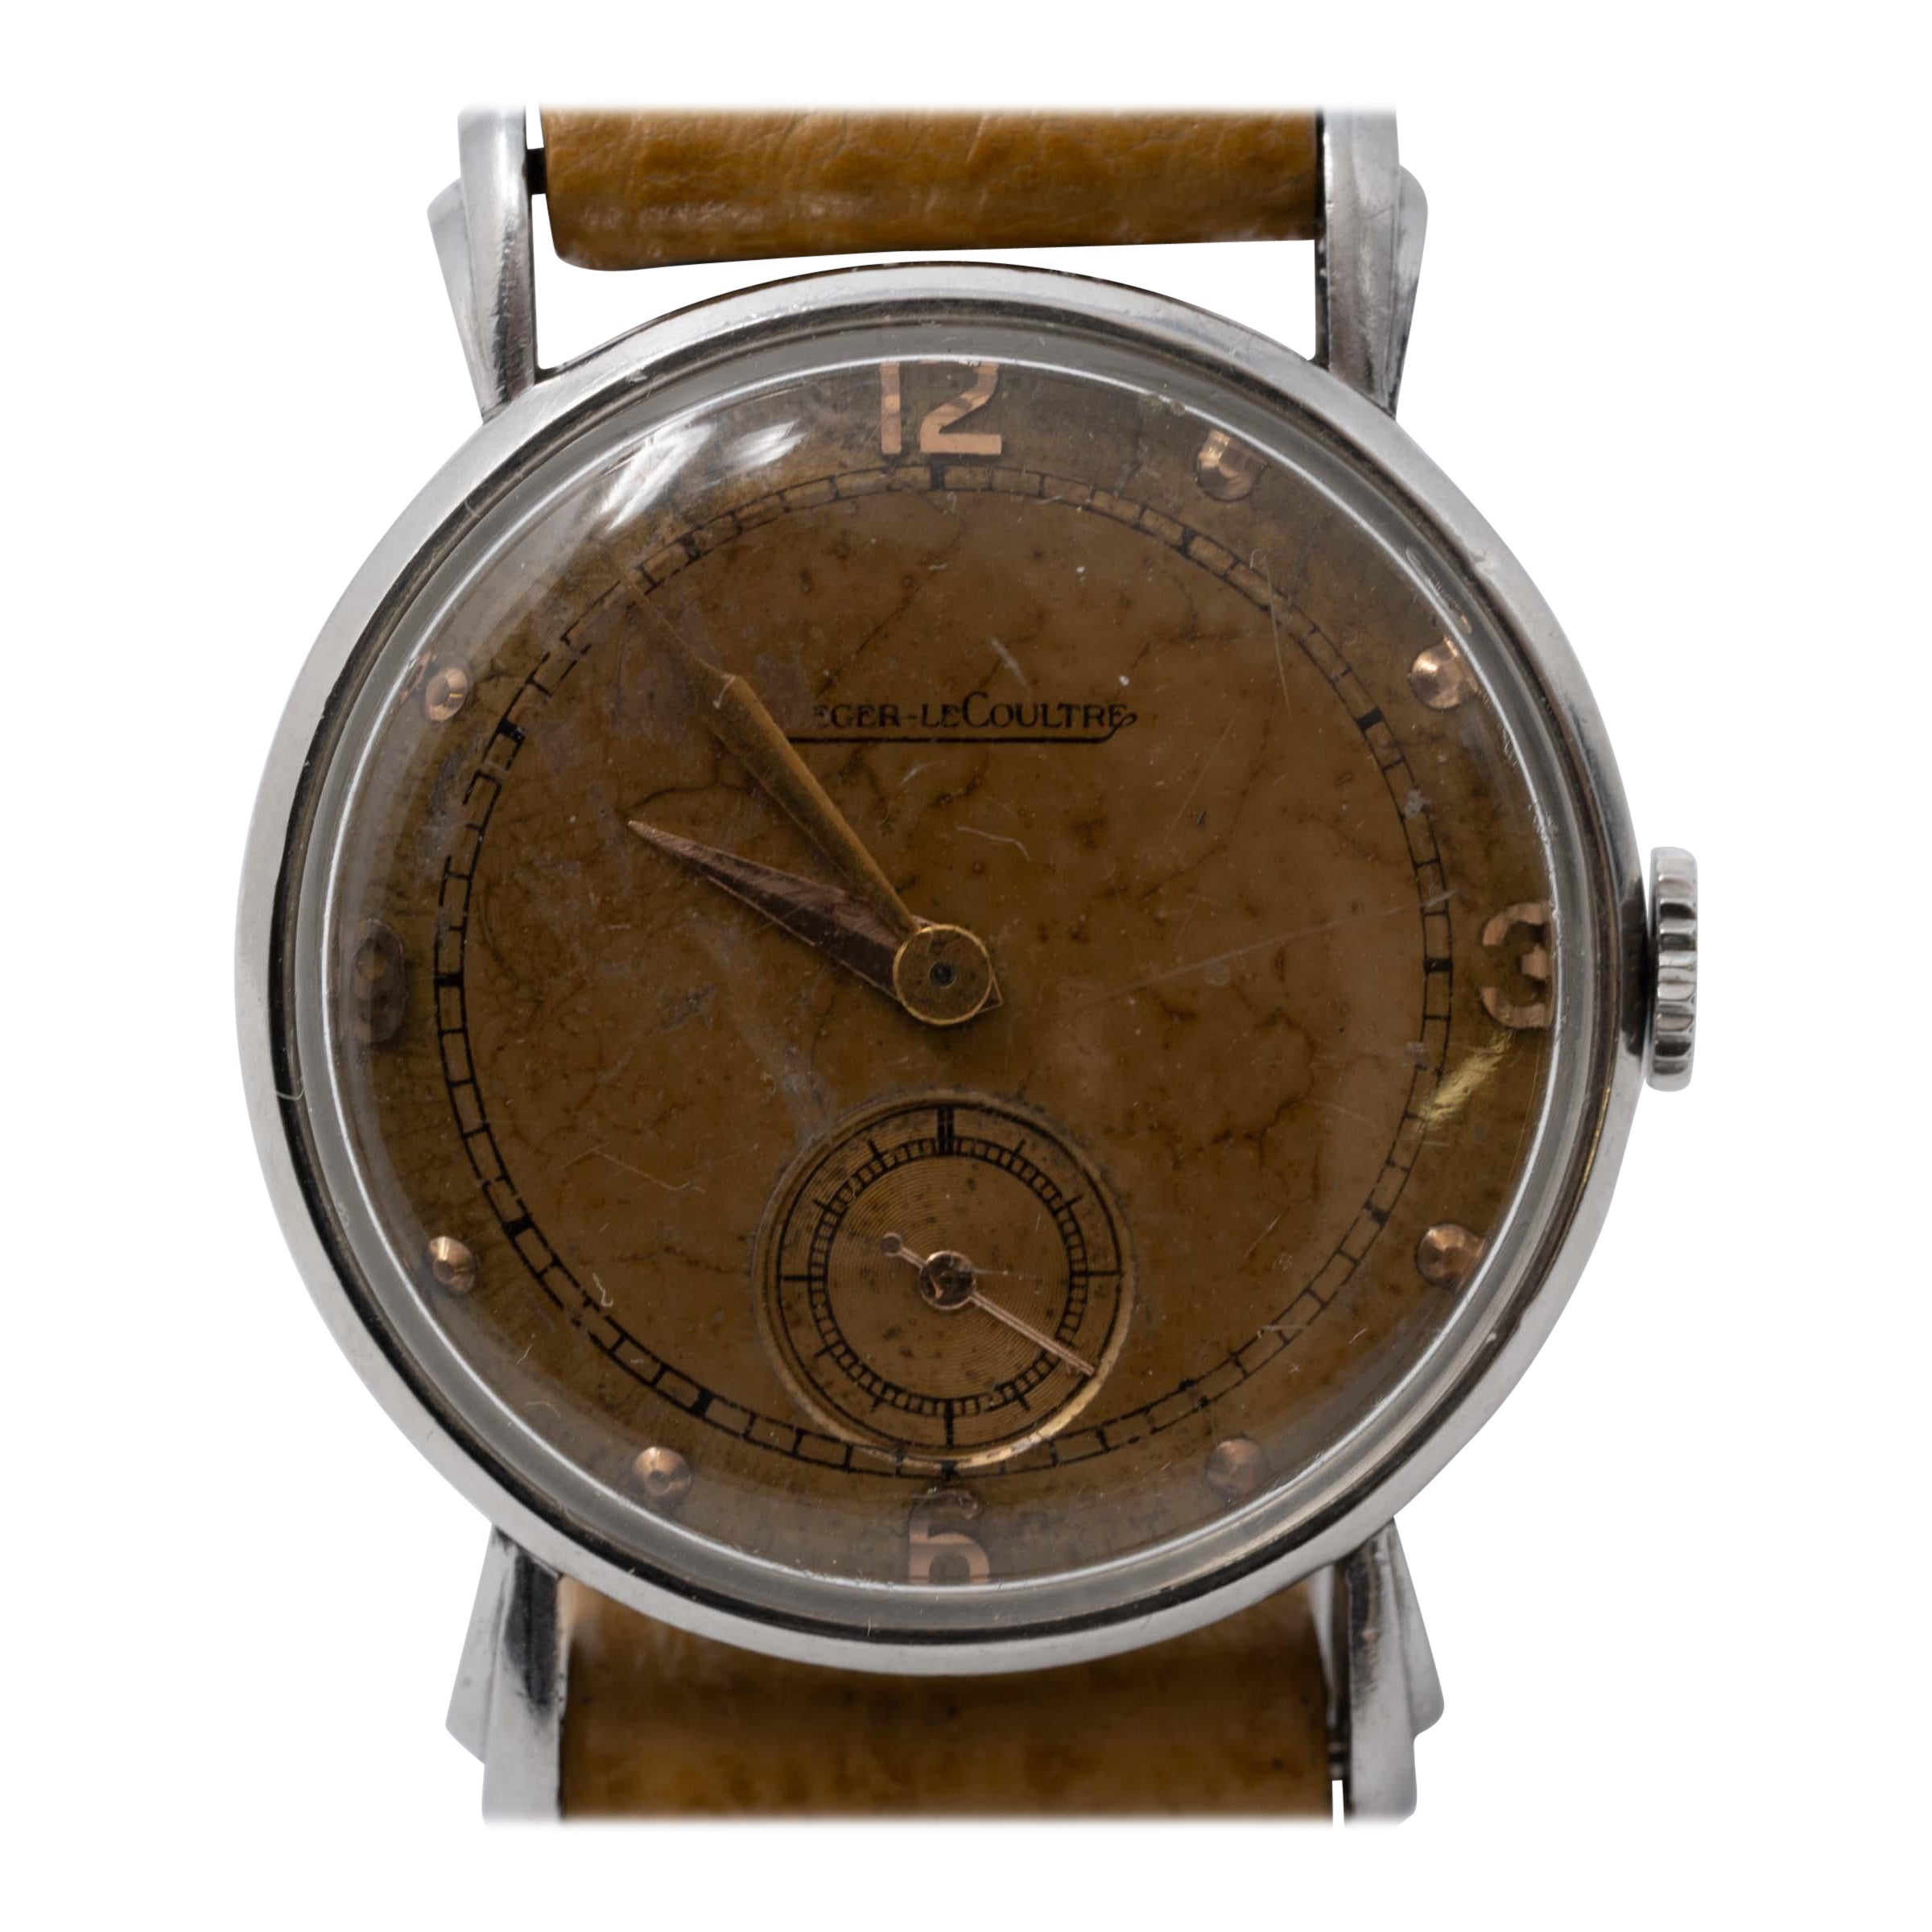 Jaeger LeCoultre Stainless Steel Wristwatch, circa 1950